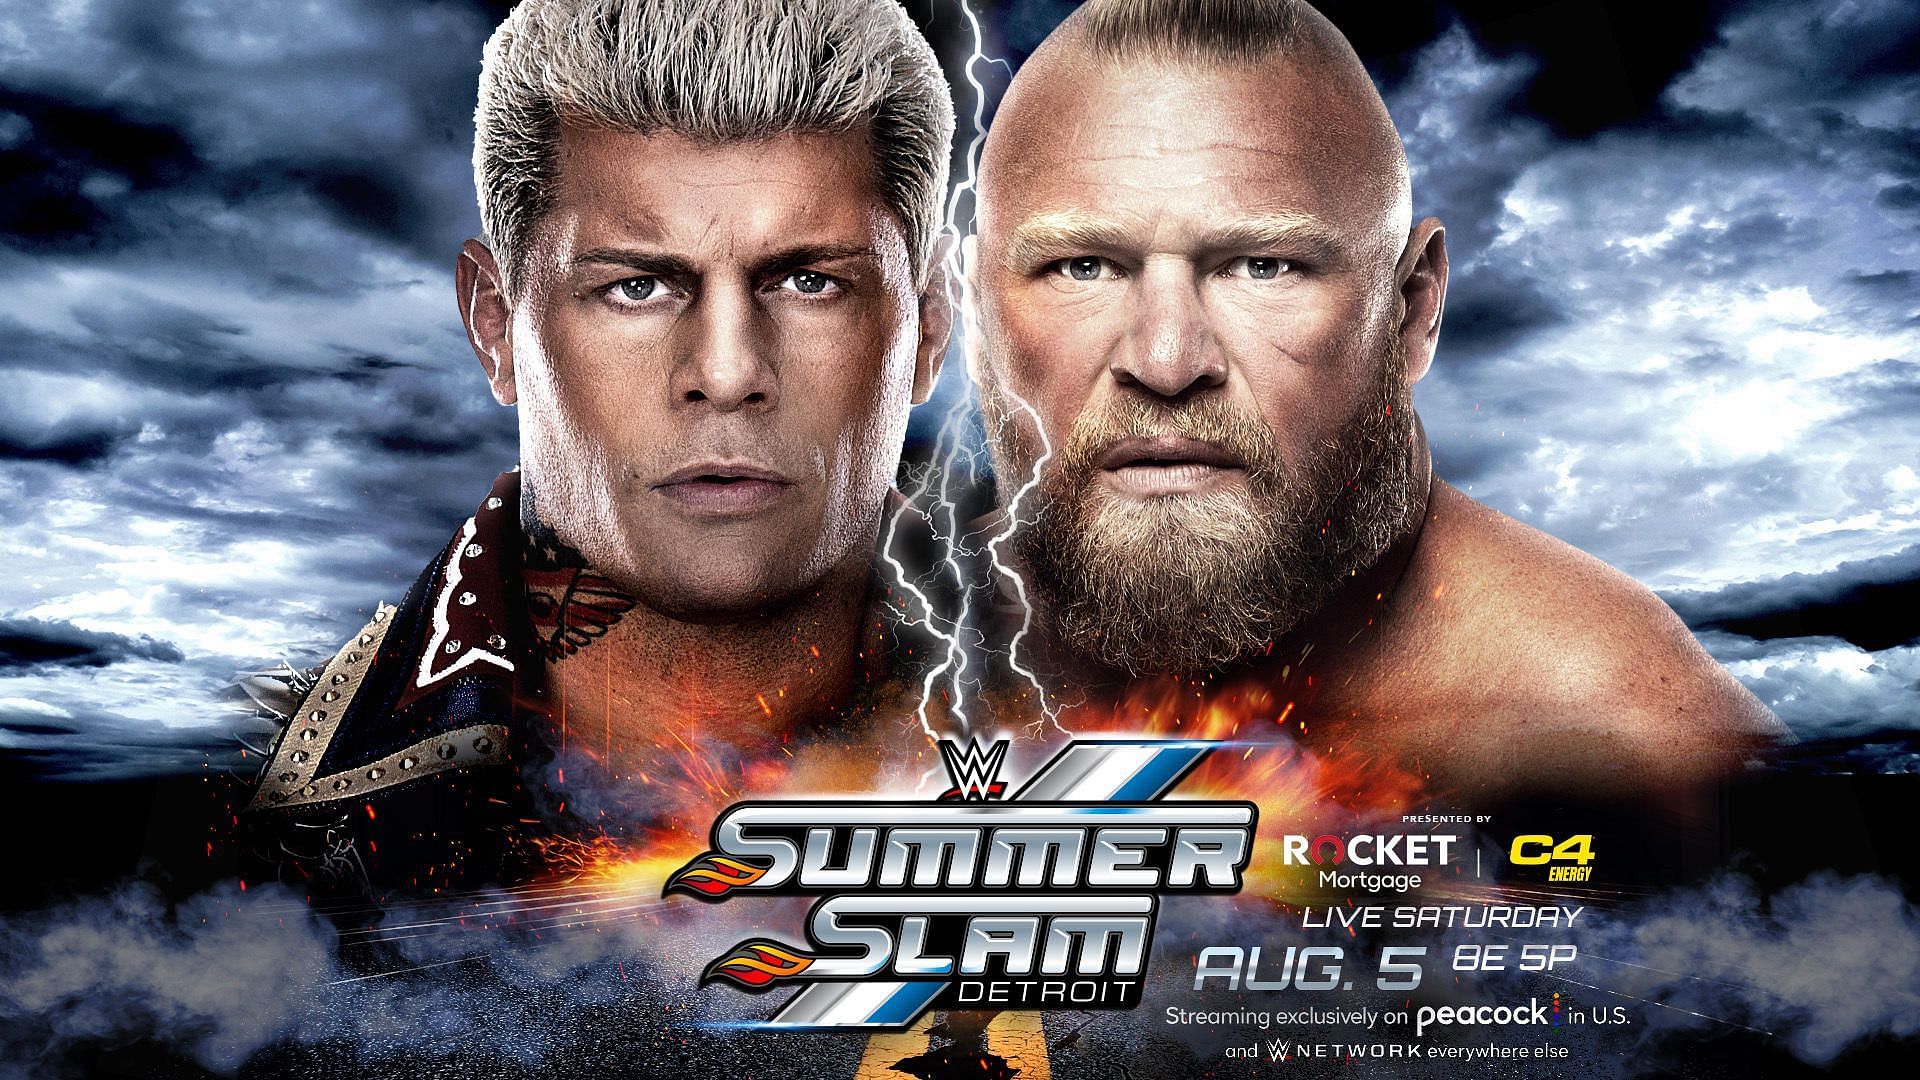 Cody Rhodes and Brock Lesnar will look to settle their rivalry at SummerSlam